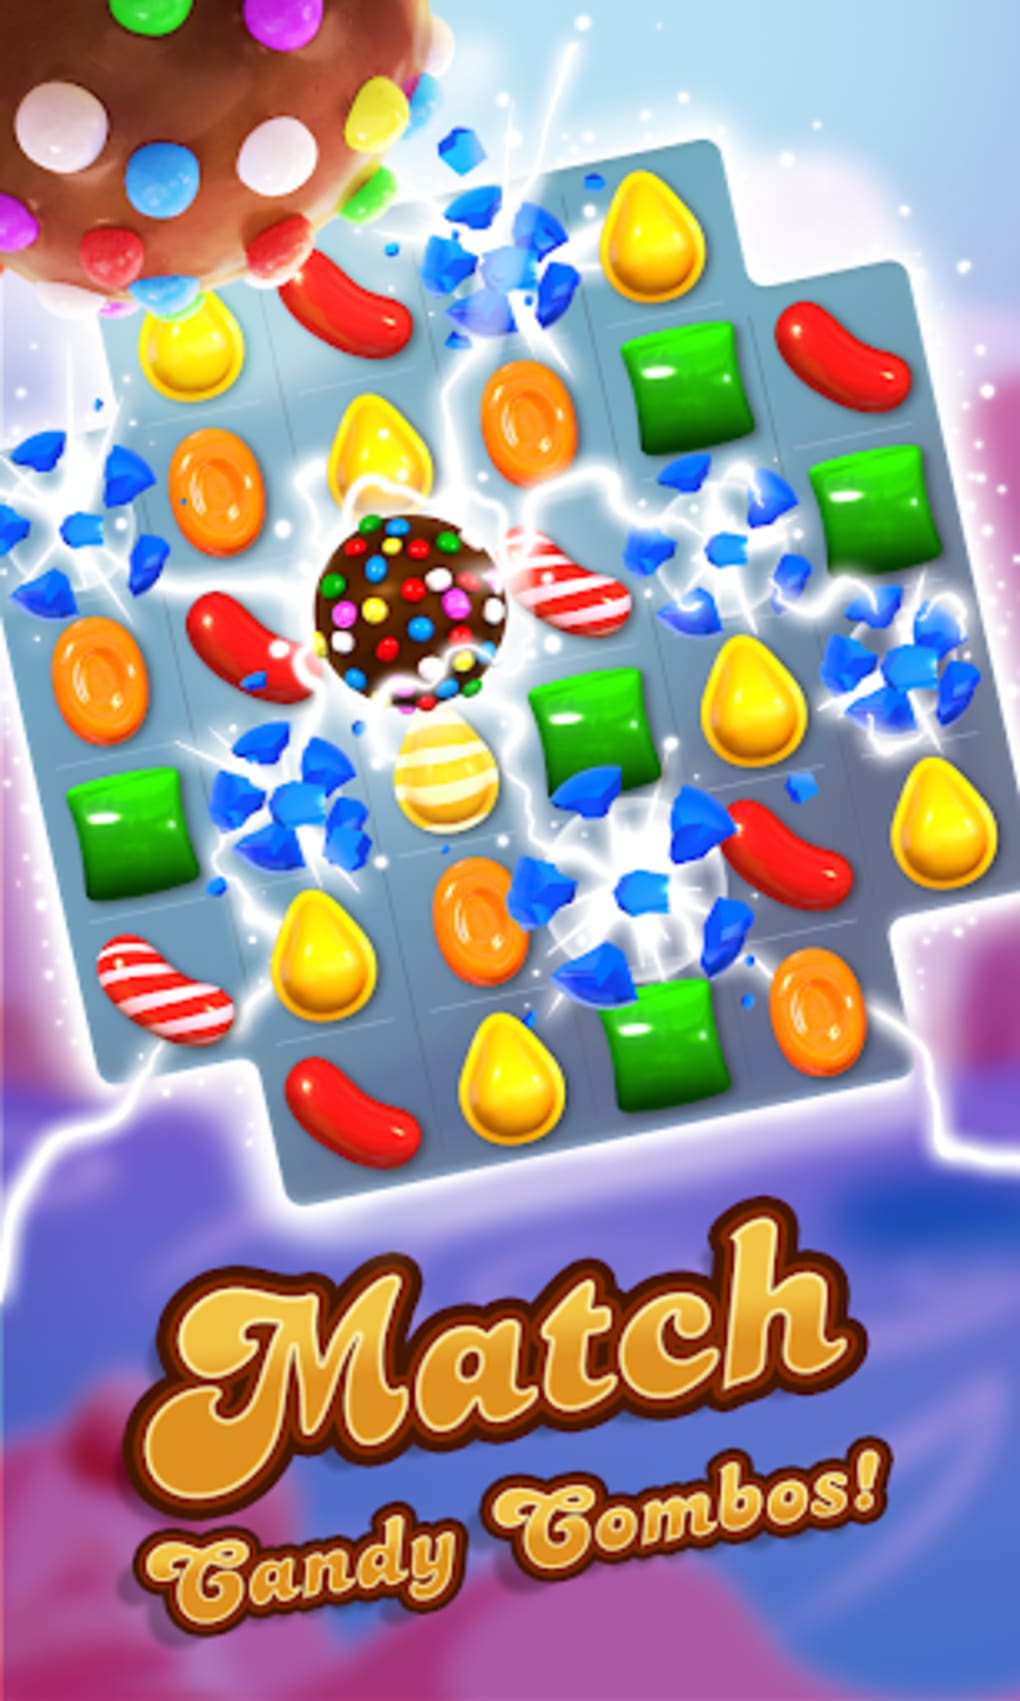 Download Candy Crush Saga APK 1.272.4.1 for Android